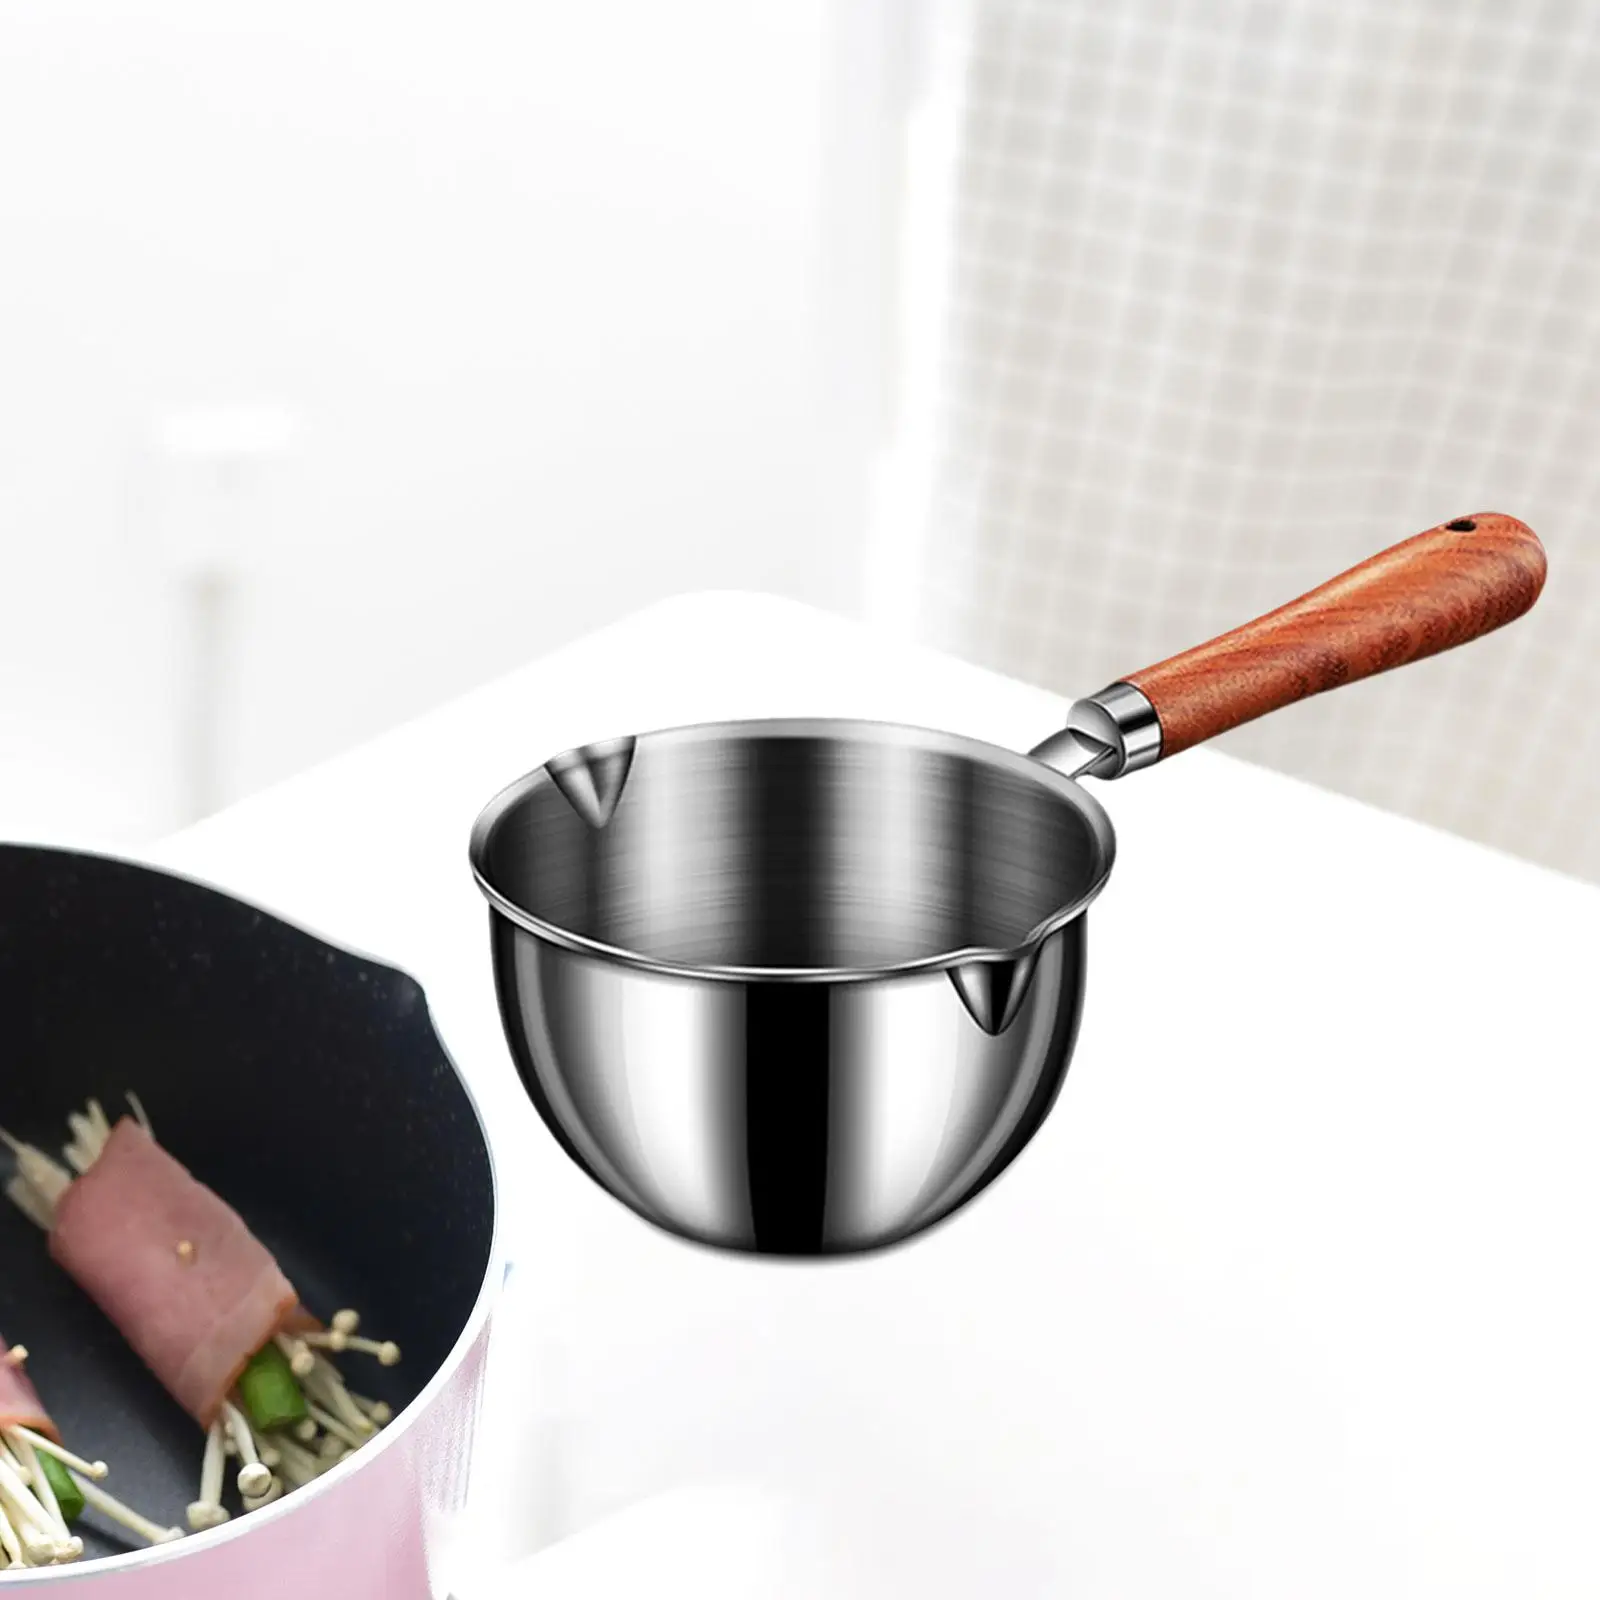 Stainless Steel Saucepan Pot with Dual pour spouts for Chocolate Melting